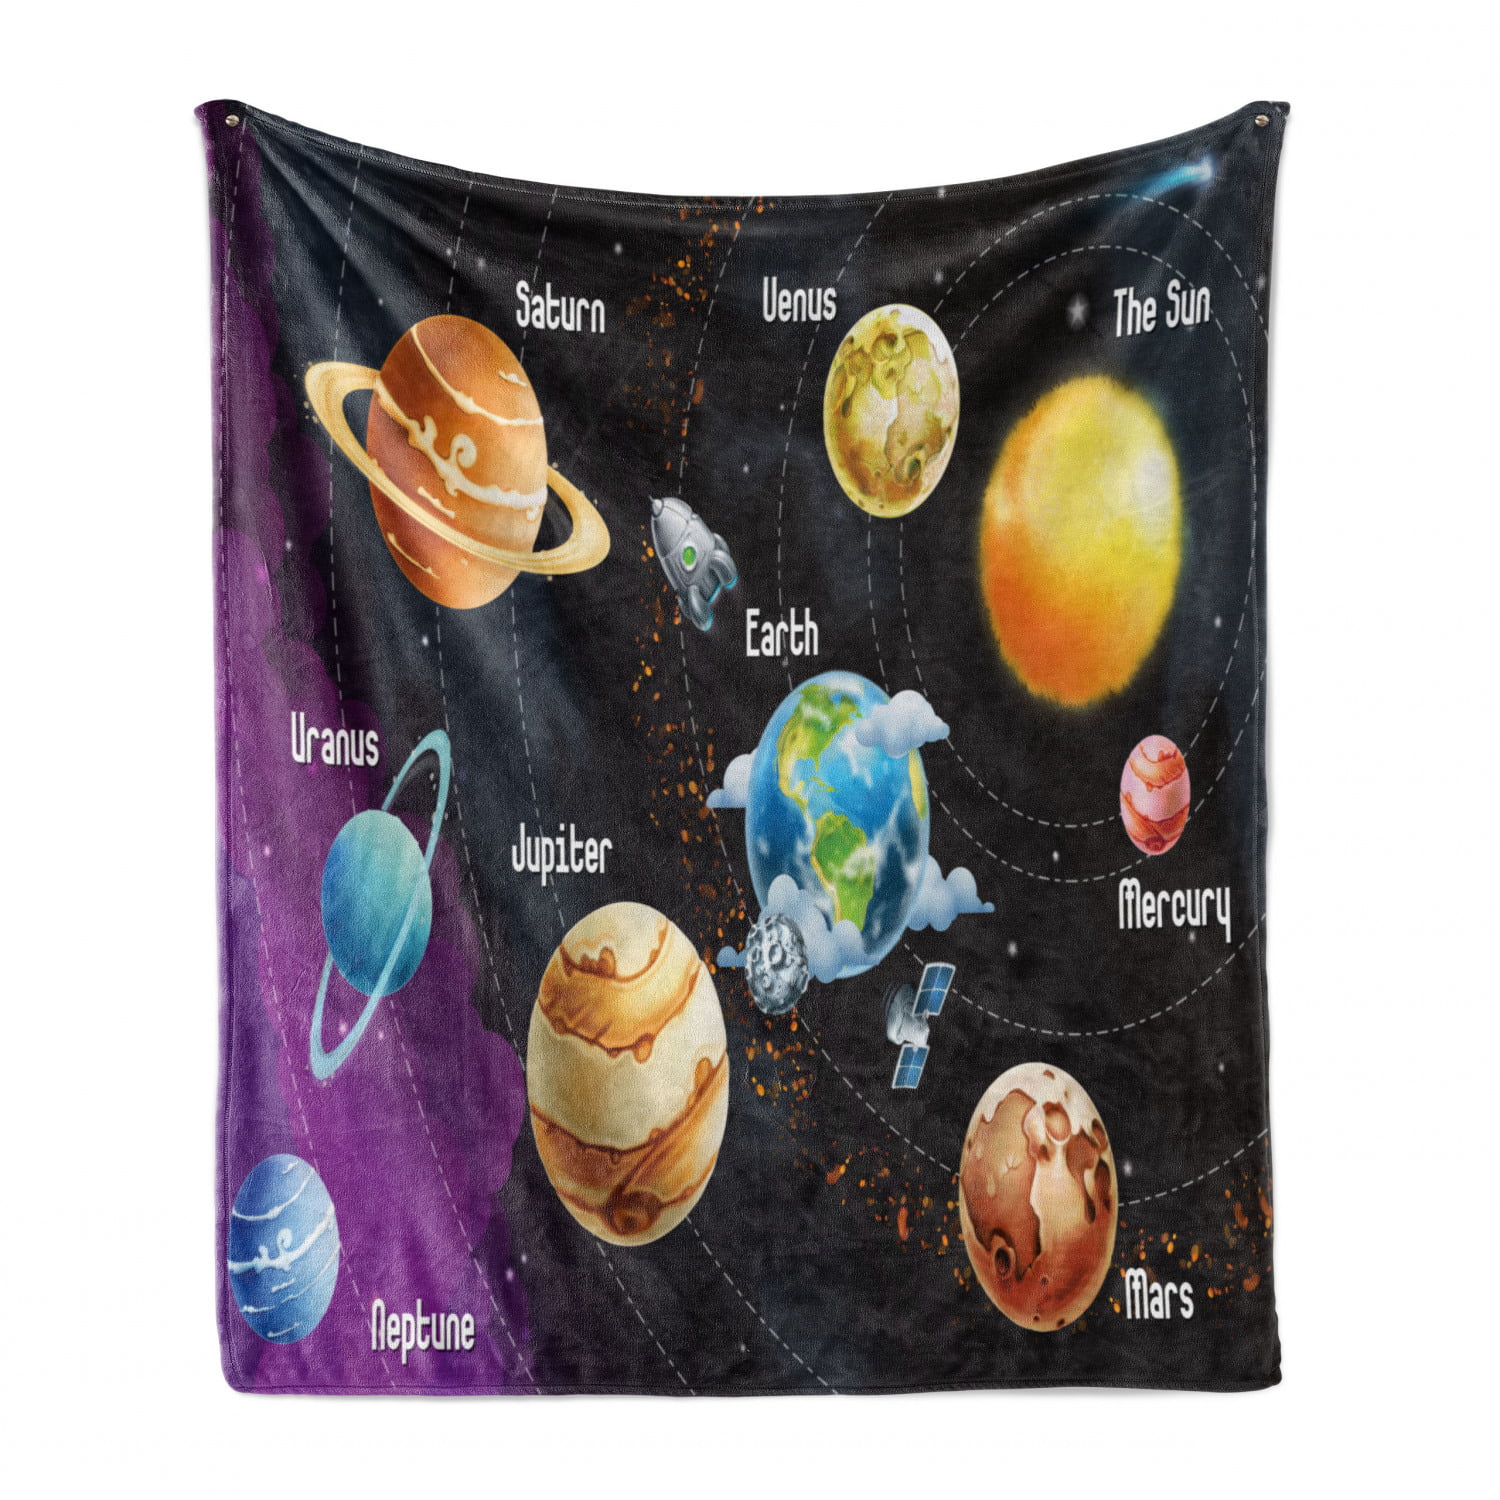 Cosmic Illustration of Planets Moons Shooting Stars and Galaxies in Doodle Style Cozy Plush for Indoor and Outdoor Use Multicolor Lunarable Space Soft Flannel Fleece Throw Blanket 70 x 90 